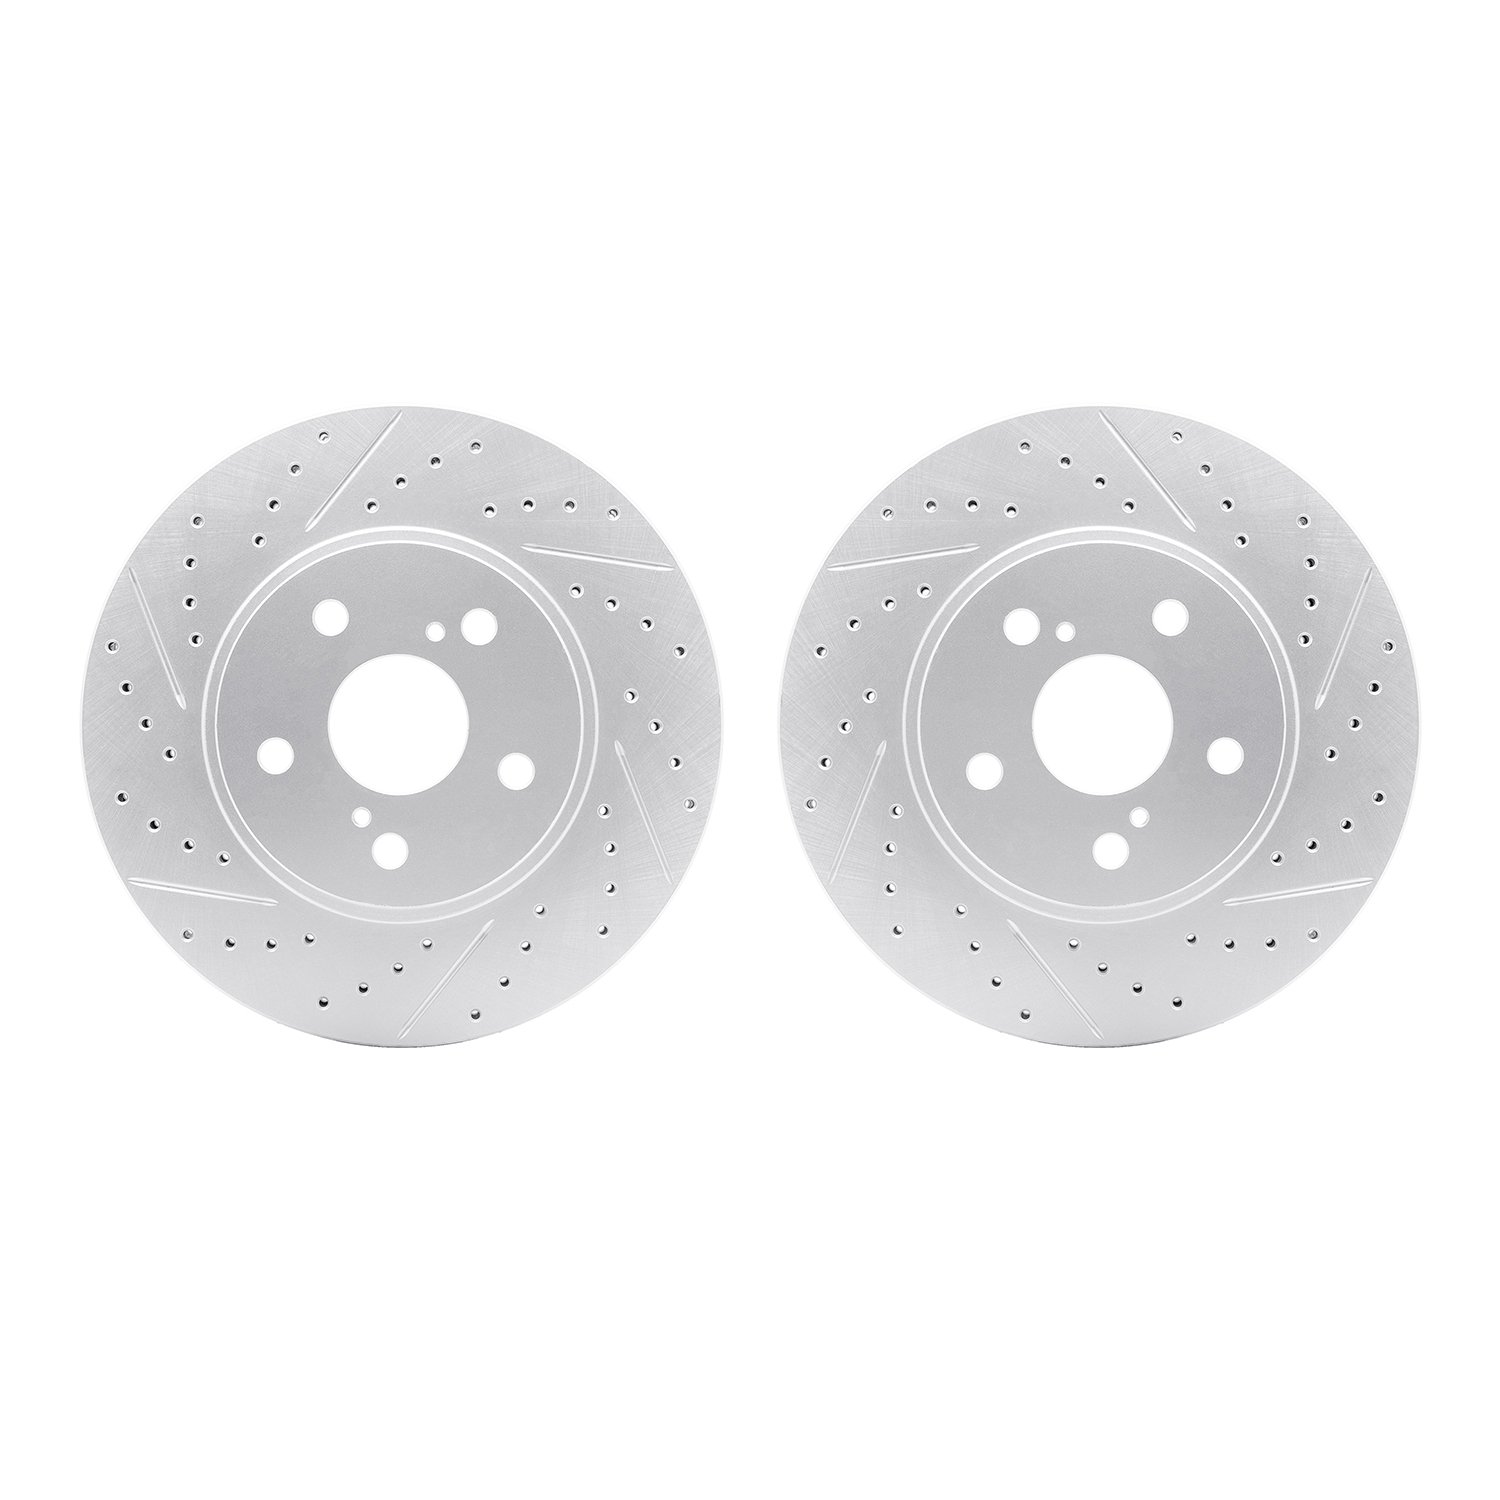 2002-76003 Geoperformance Drilled/Slotted Brake Rotors, 2002-2015 Lexus/Toyota/Scion, Position: Front